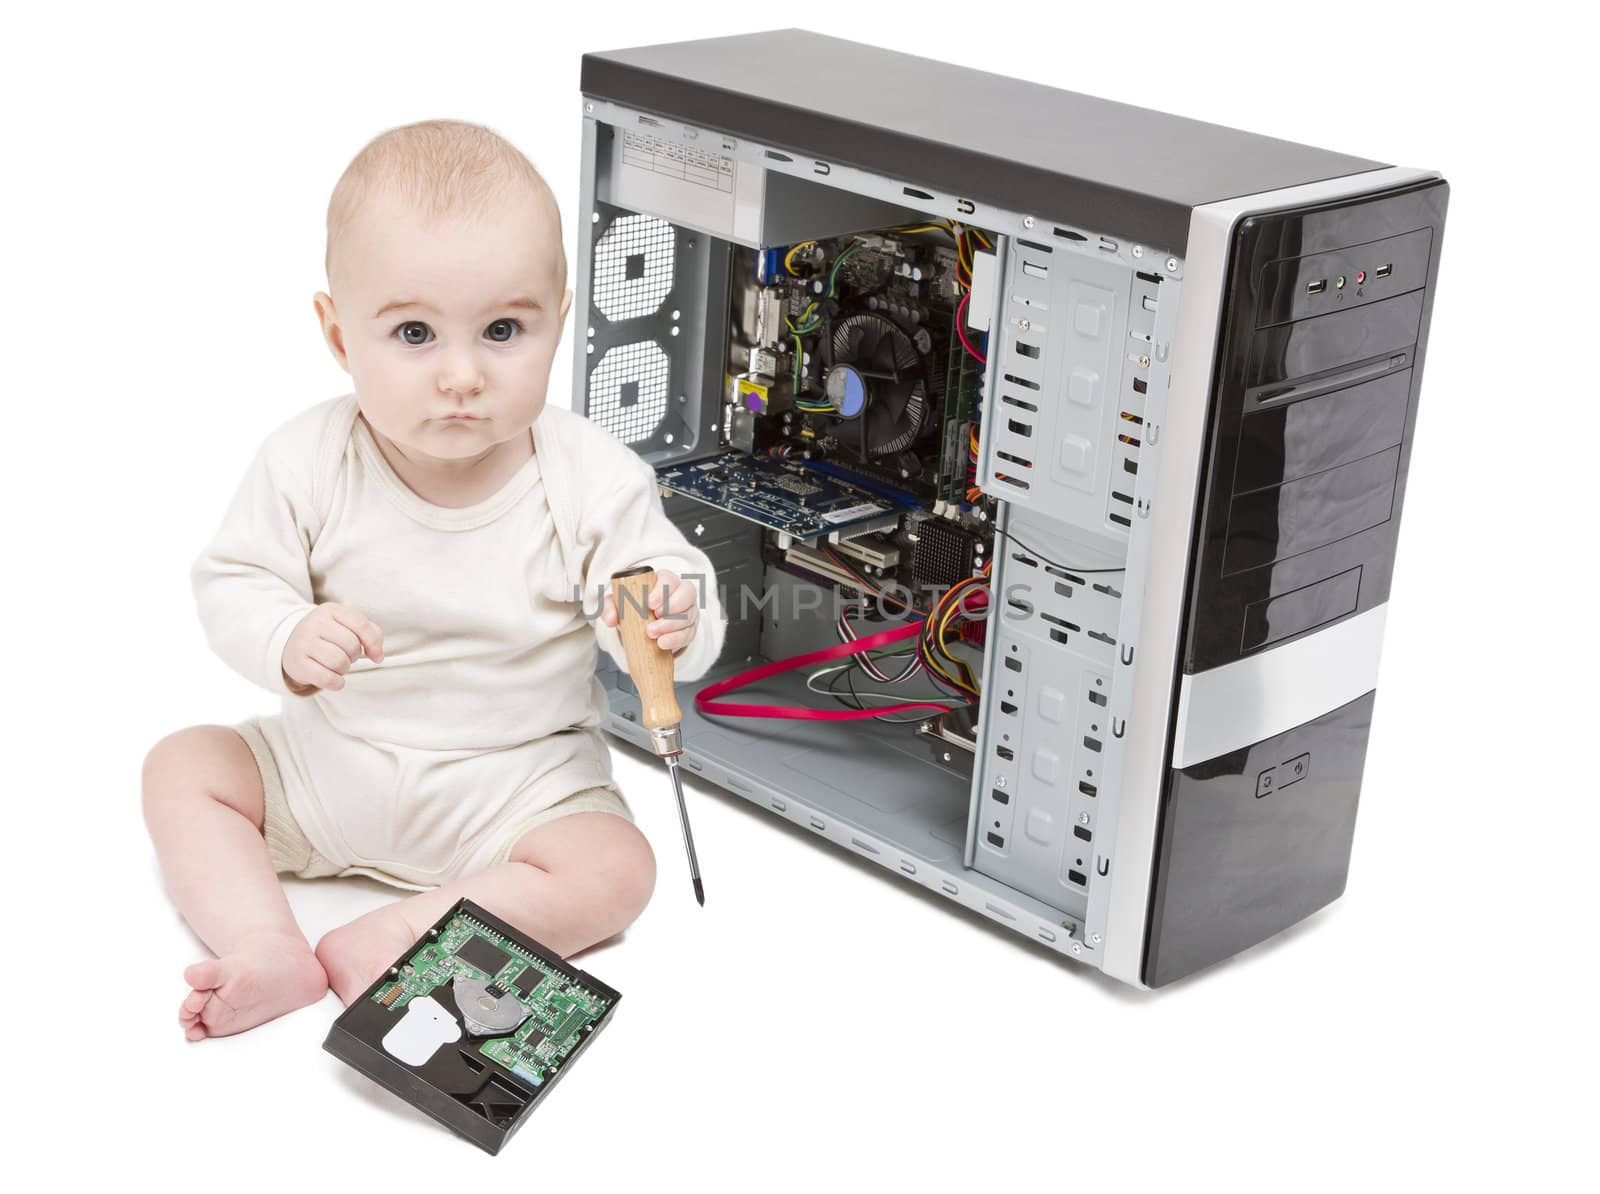 young child with screwdriver in hand working on open computer in white background. hard disk laying around